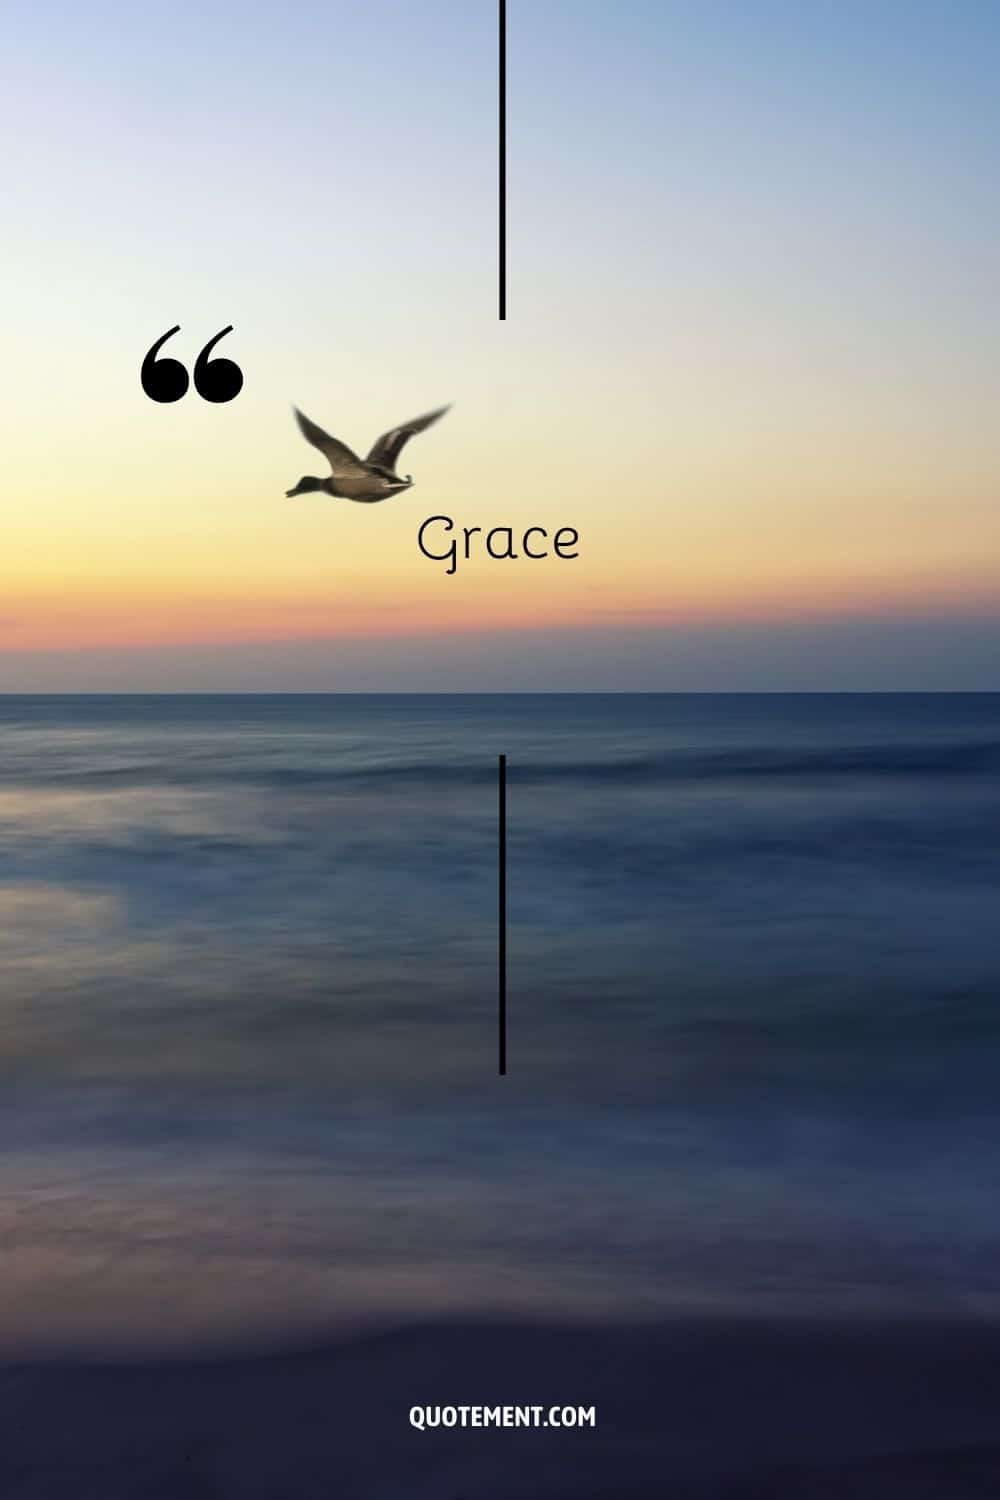 a duck flying over the water representing the word grace